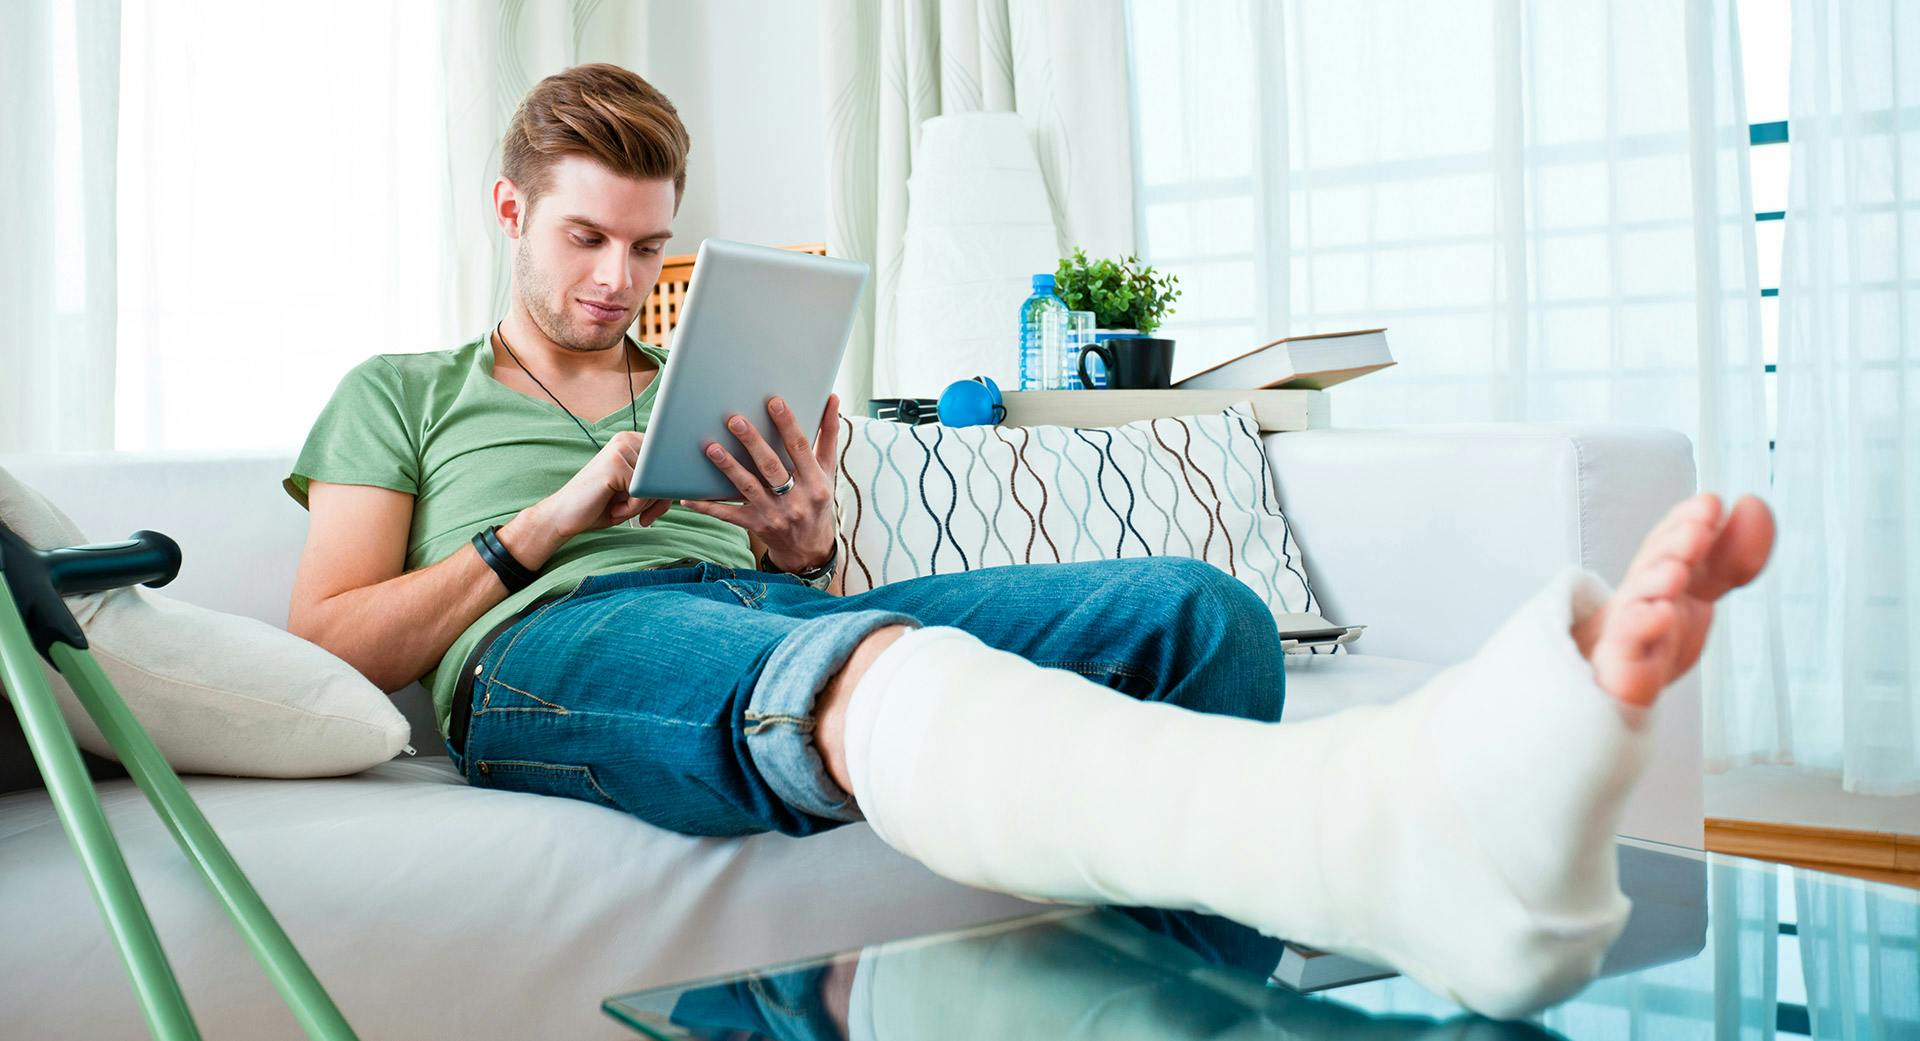 Injured man with lower leg cast resting on coffee table